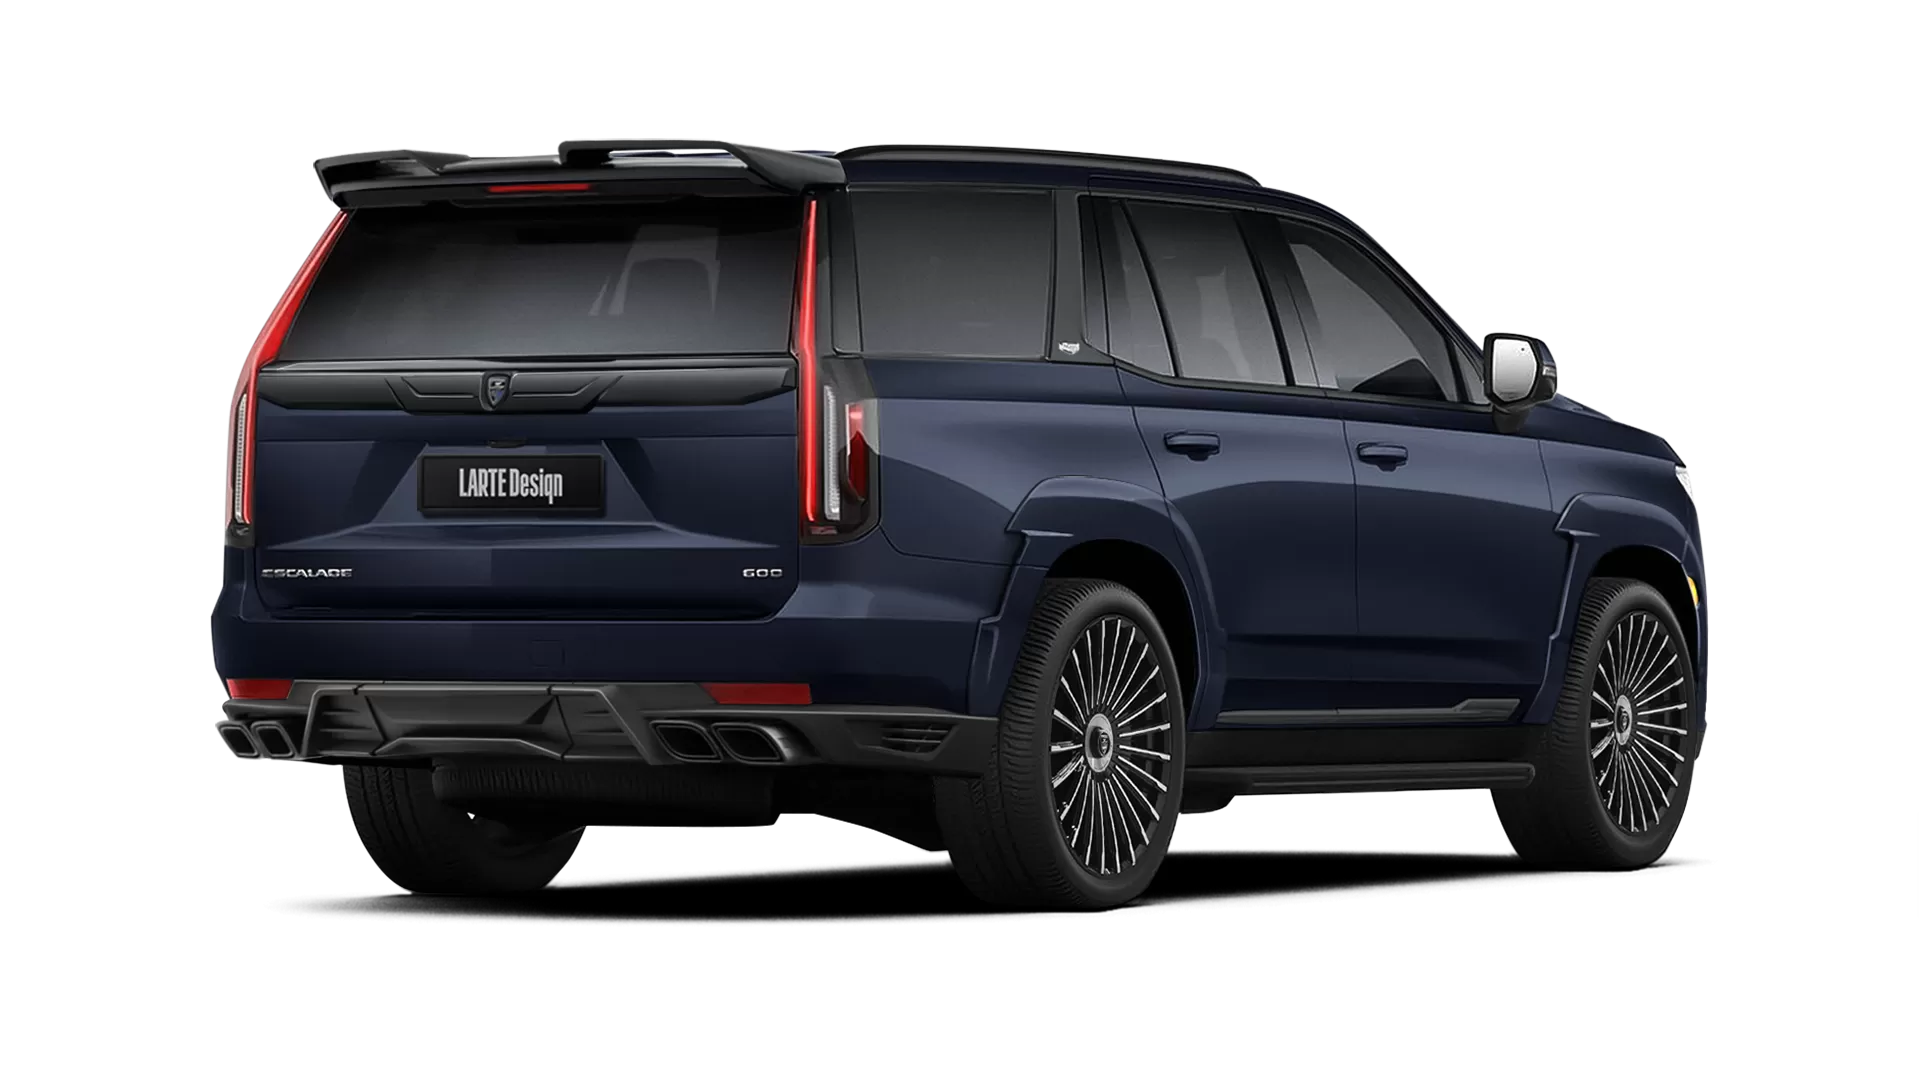 Cadillac Escalade ESV GMT 1XX with painted body kit: rear view shown in Dark Moon Blue